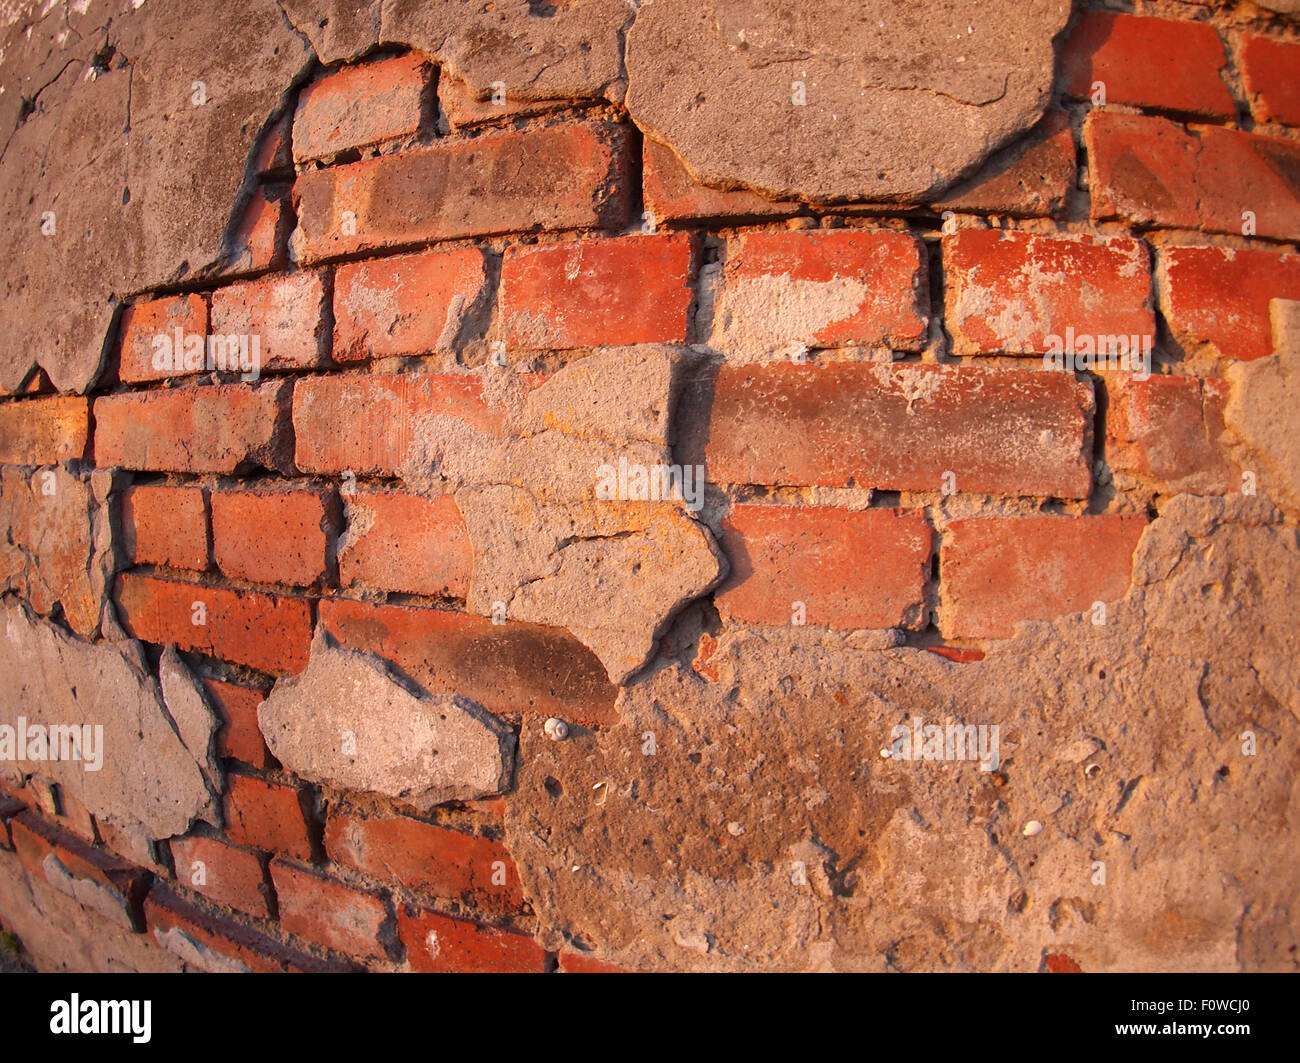 Fragment of an old shabby brick wall with wide angle fisheye lens view Stock Photo